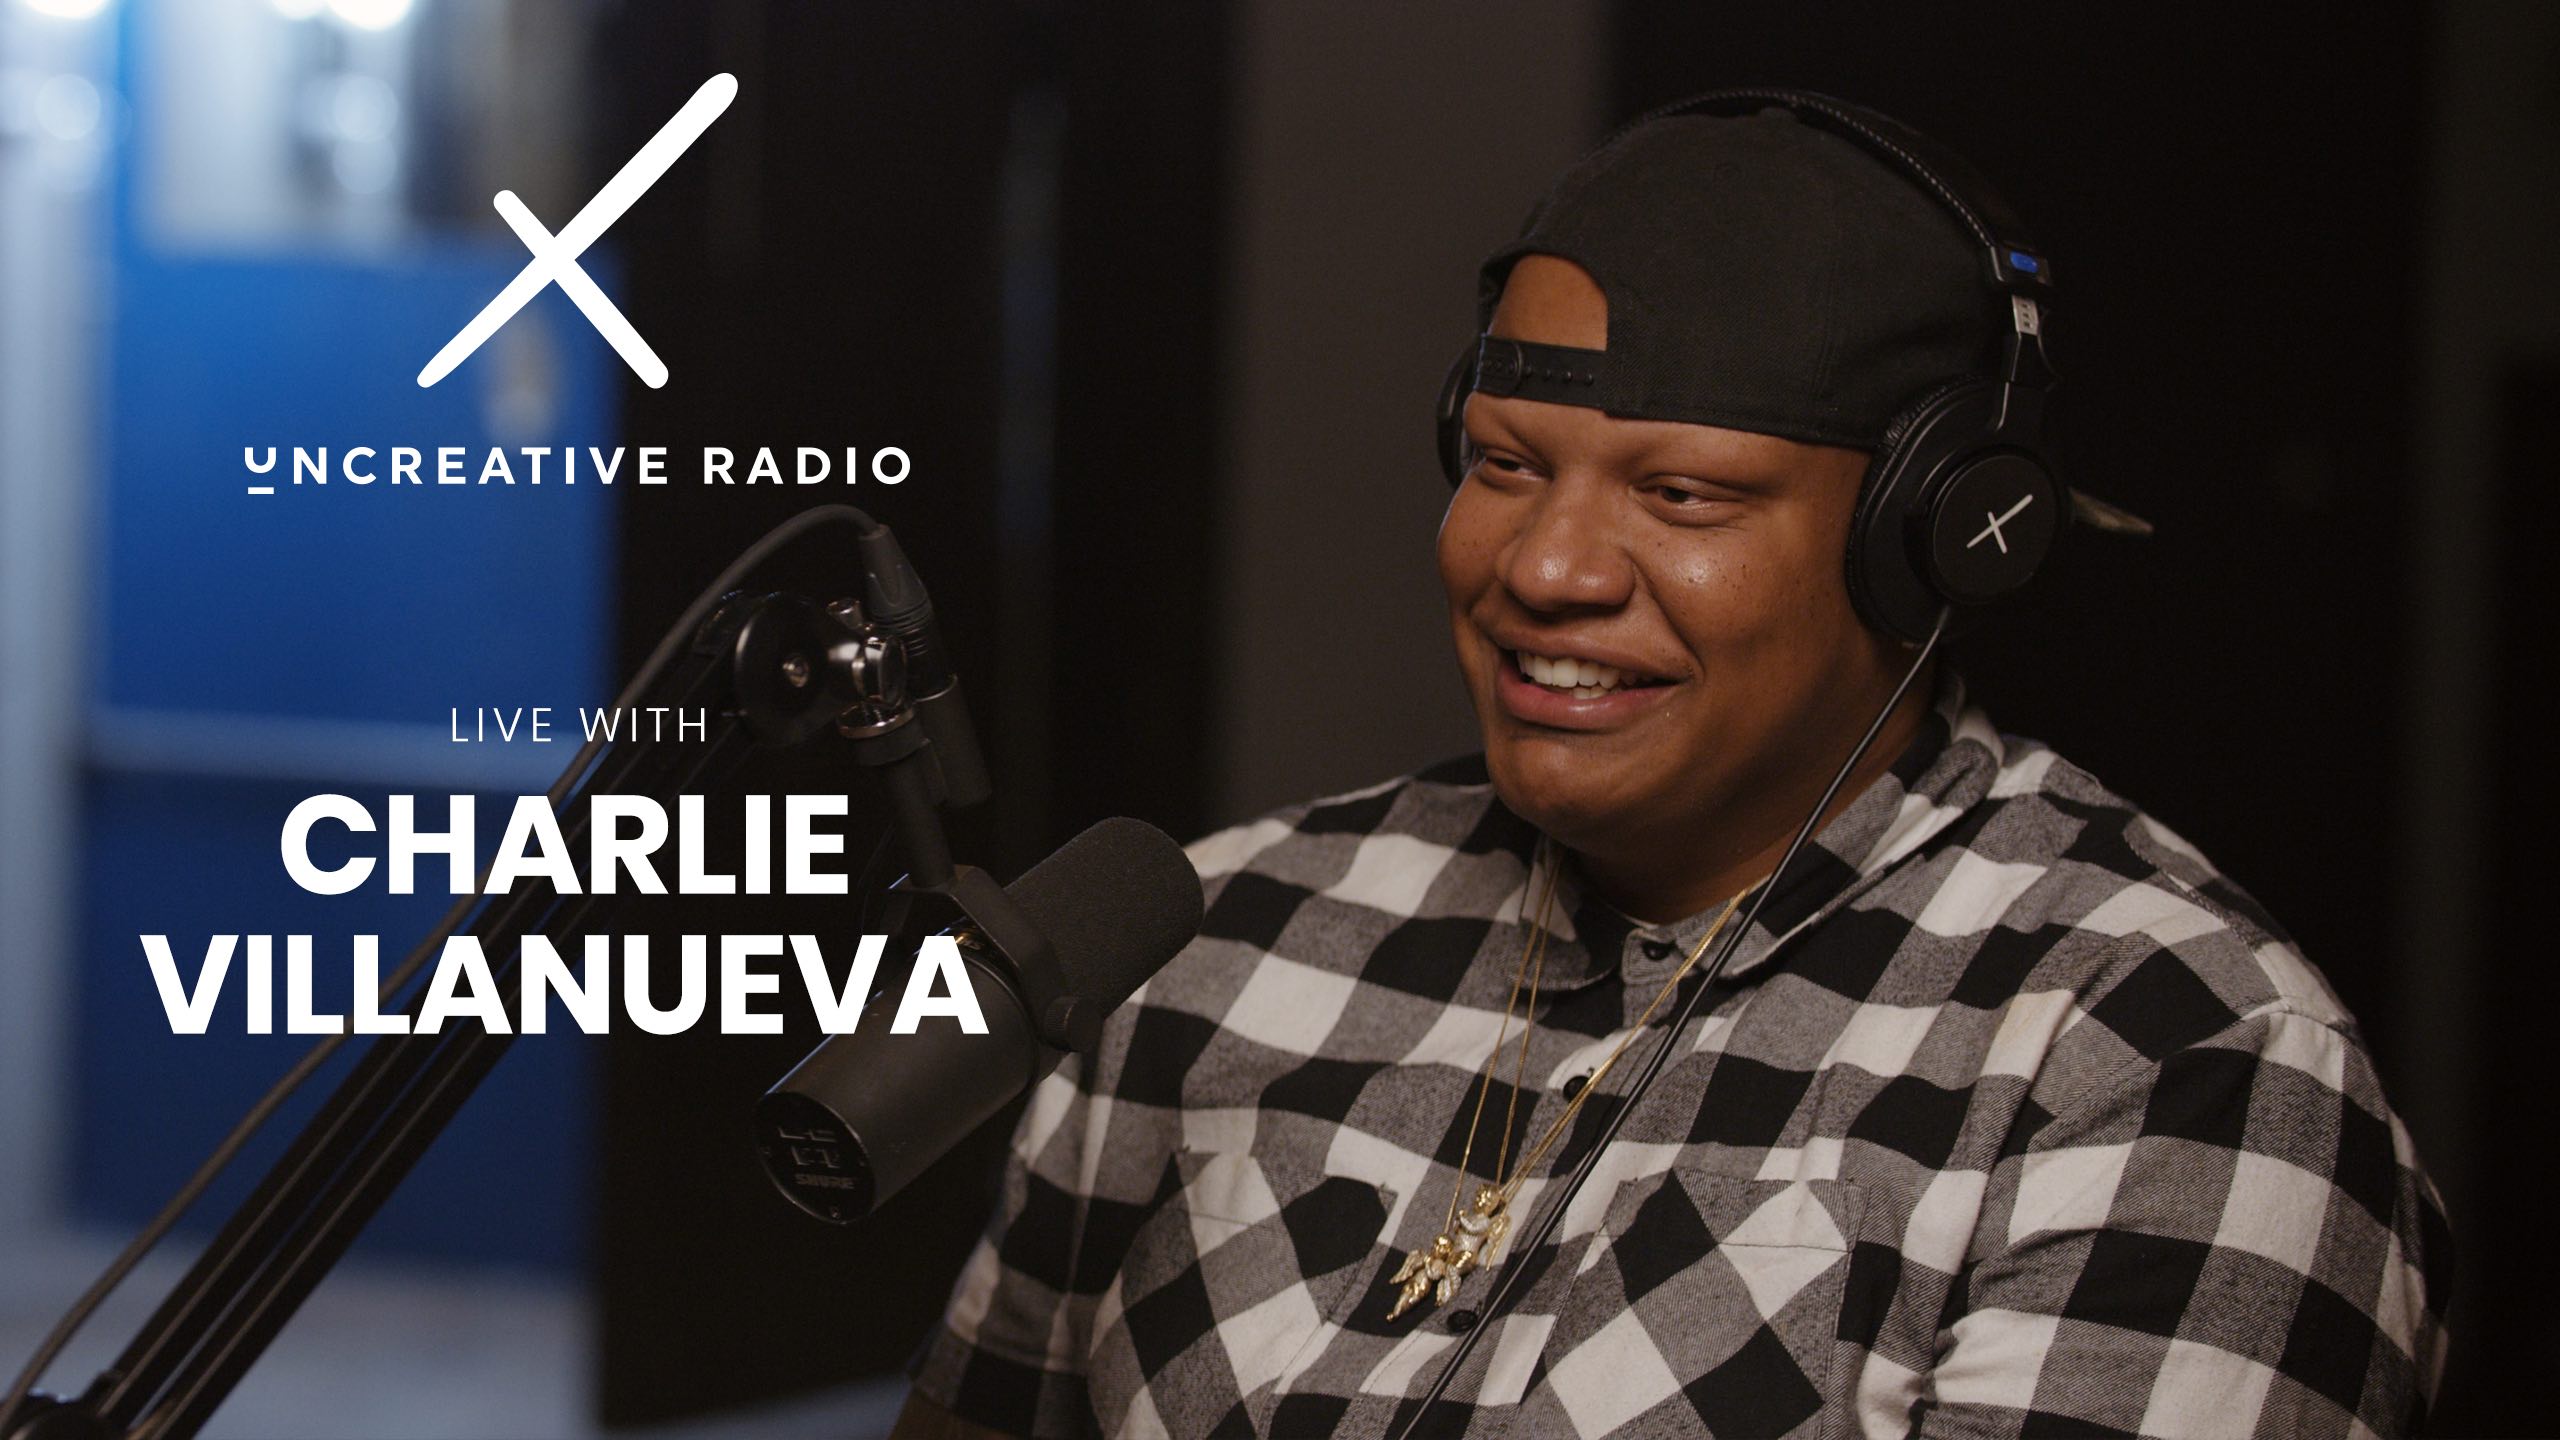 White Uncreative Radio Live With Charlie Villanueva logo with him wearing a black cap backwards and a black and white checkered shirt by a microphone and smiling